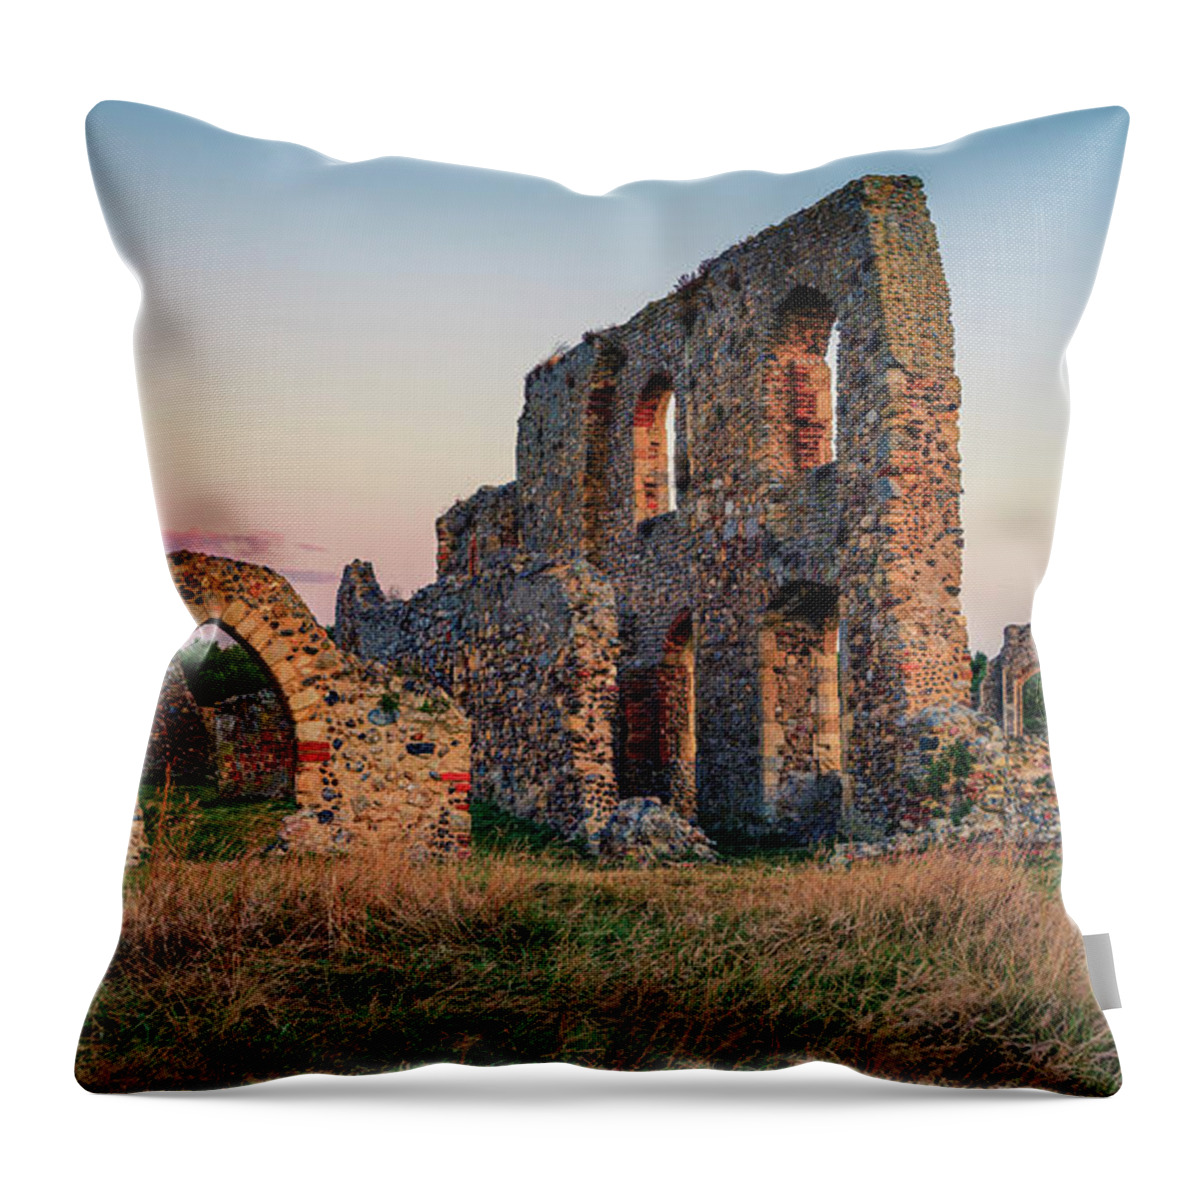 Abandoned Throw Pillow featuring the photograph Greyfriars by James Billings